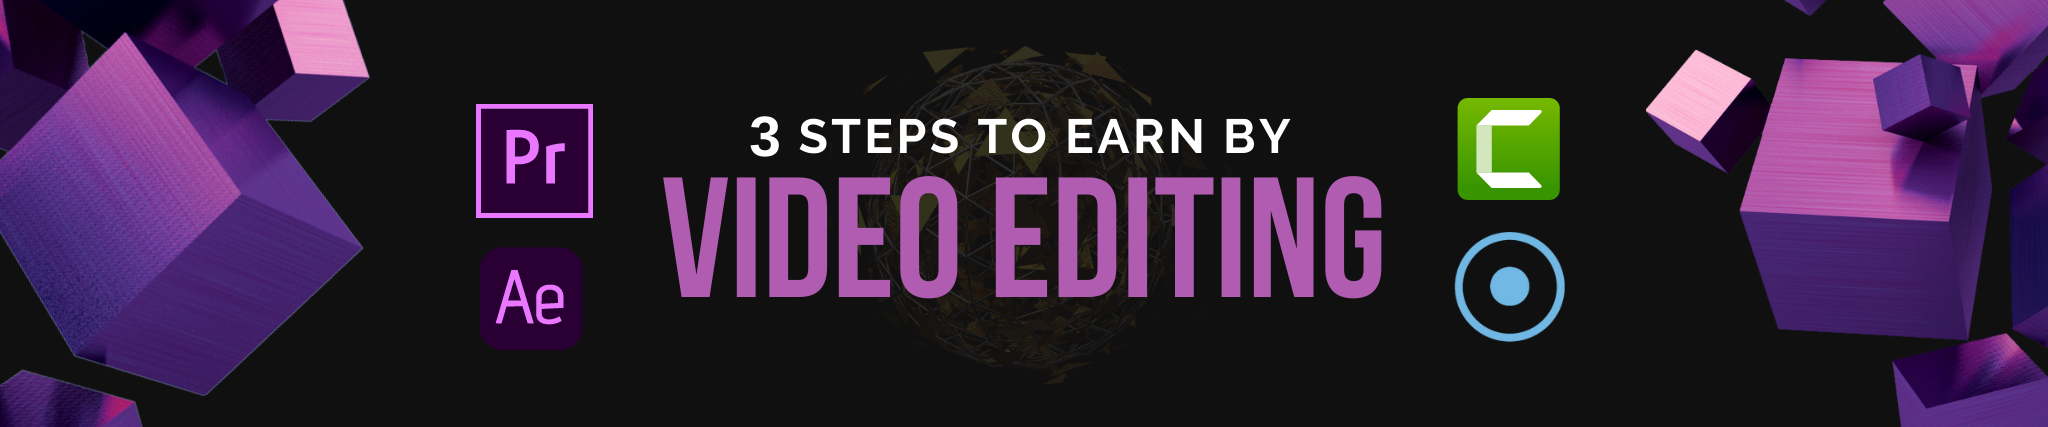 3 Steps to Earn by Video Editing